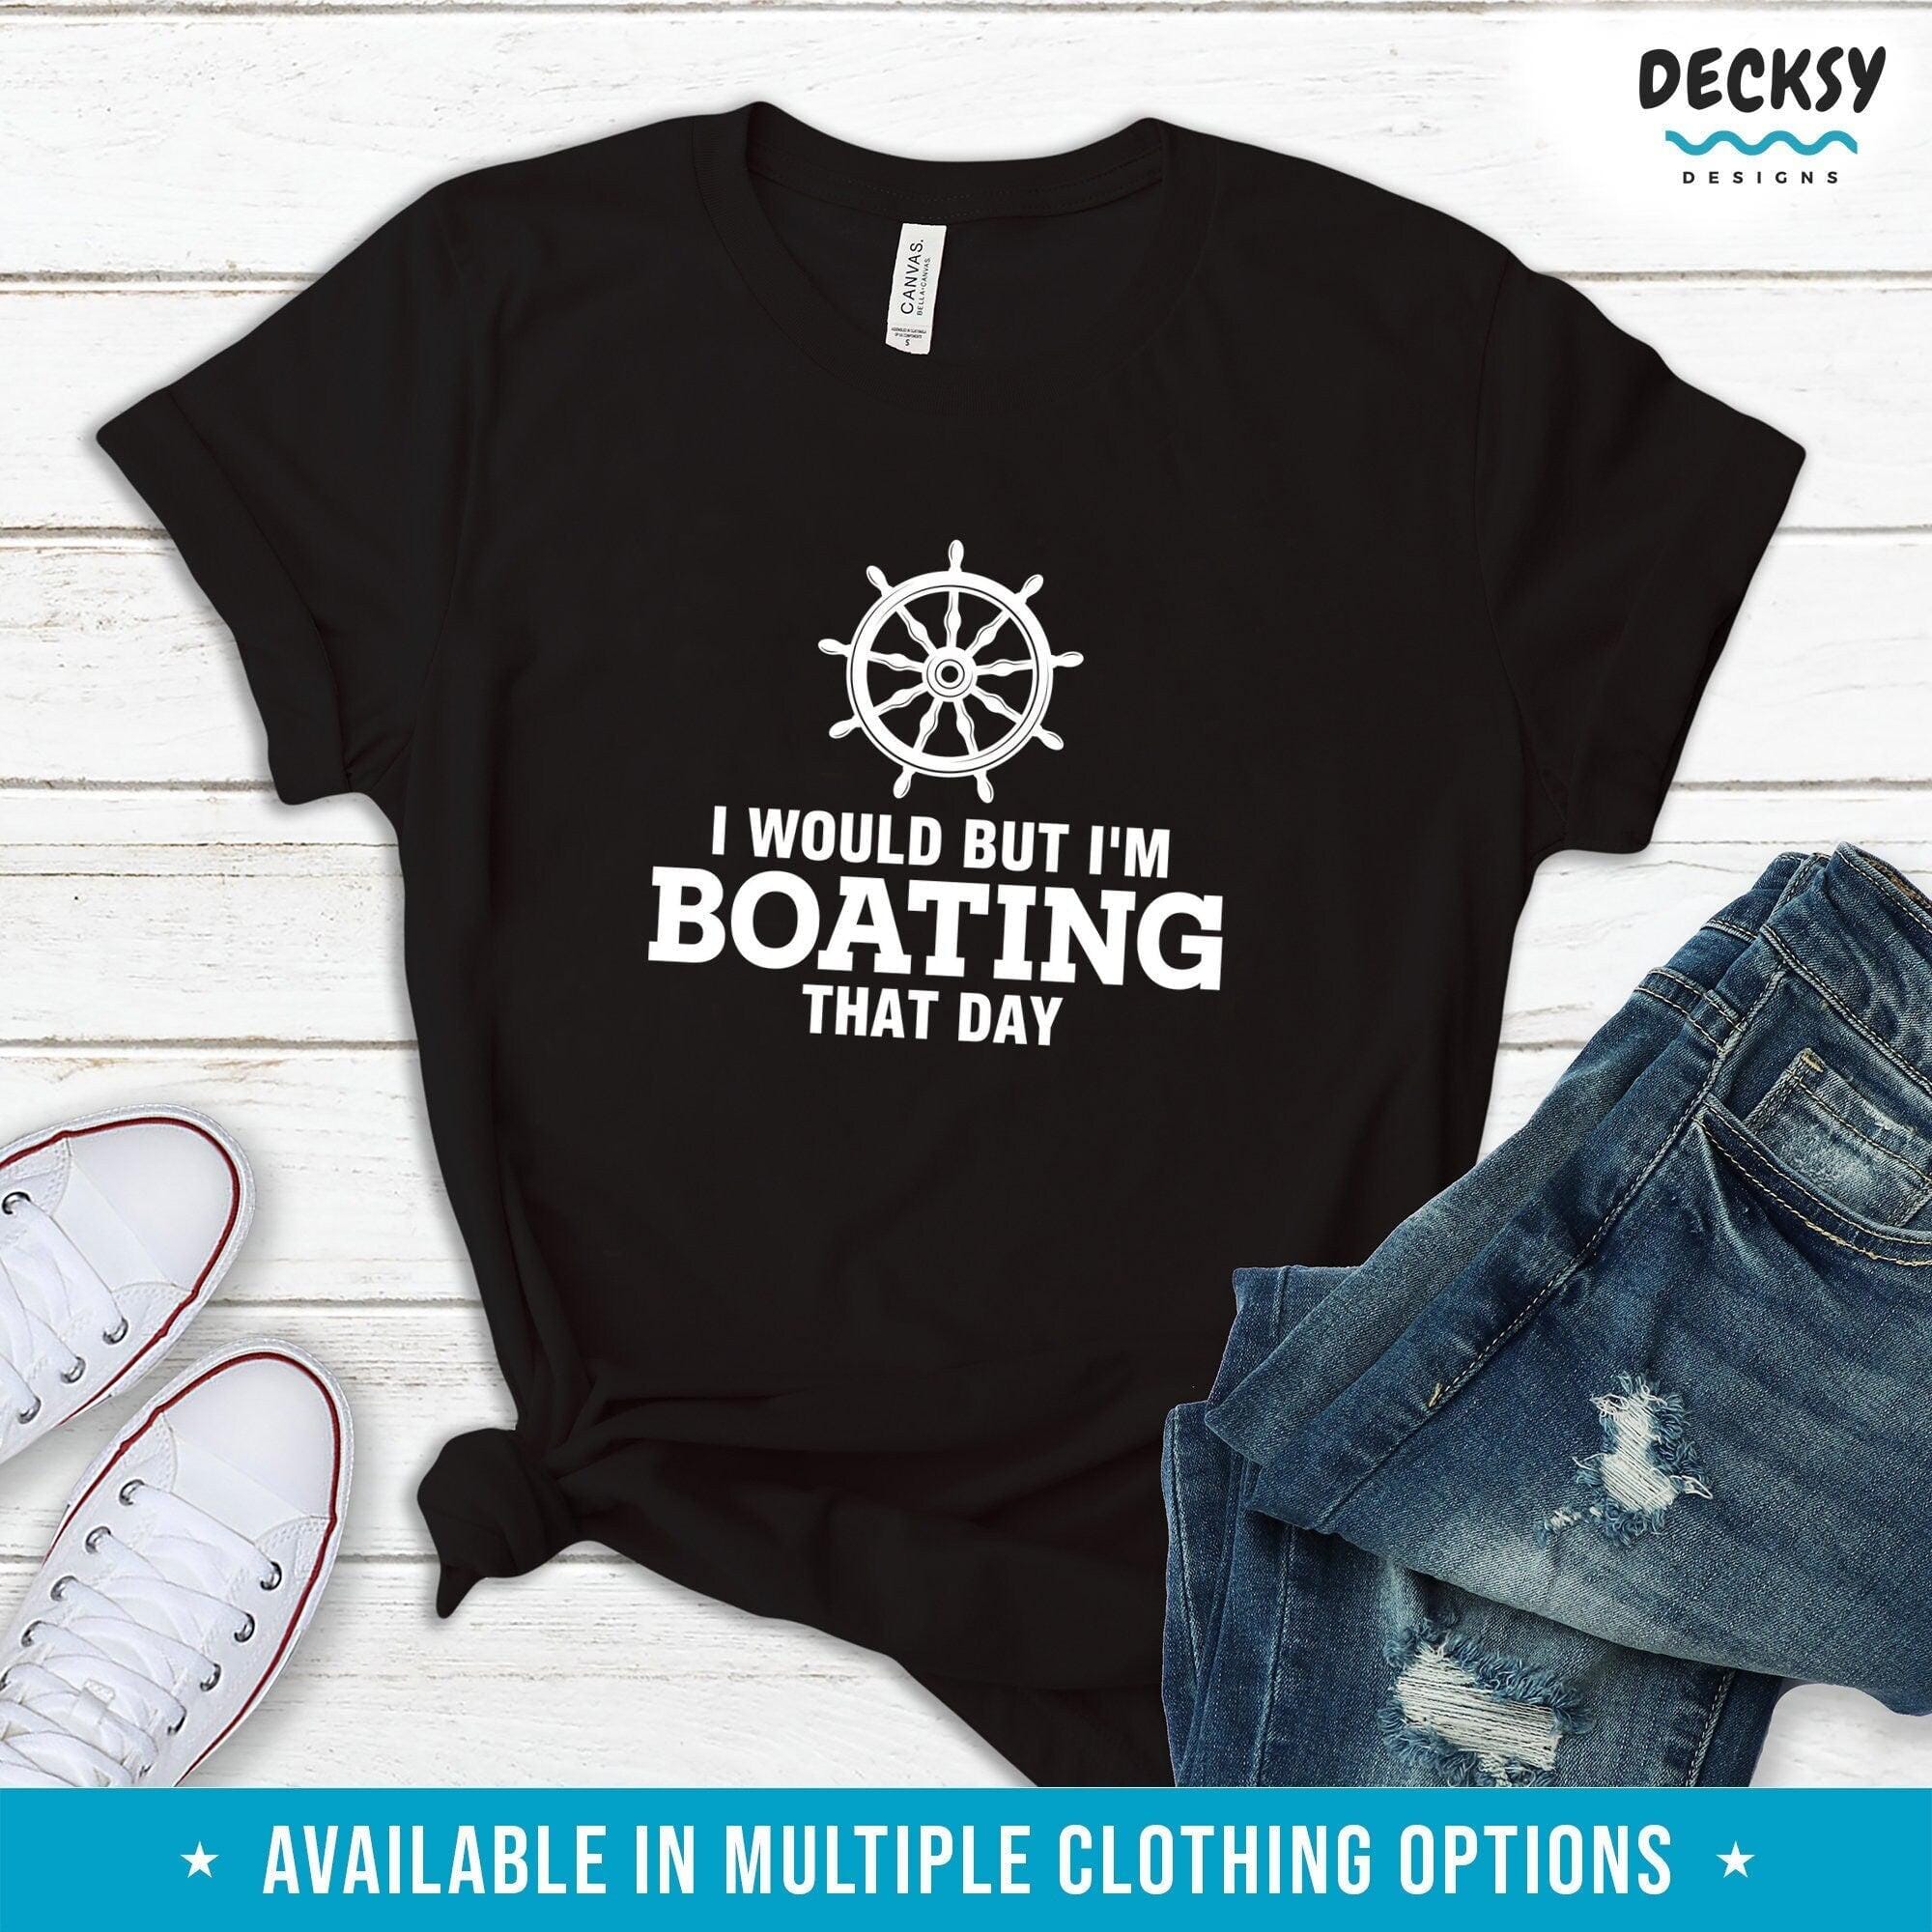 Boating Shirt, Funny Sailing Gift-Clothing:Gender-Neutral Adult Clothing:Tops & Tees:T-shirts:Graphic Tees-DecksyDesigns